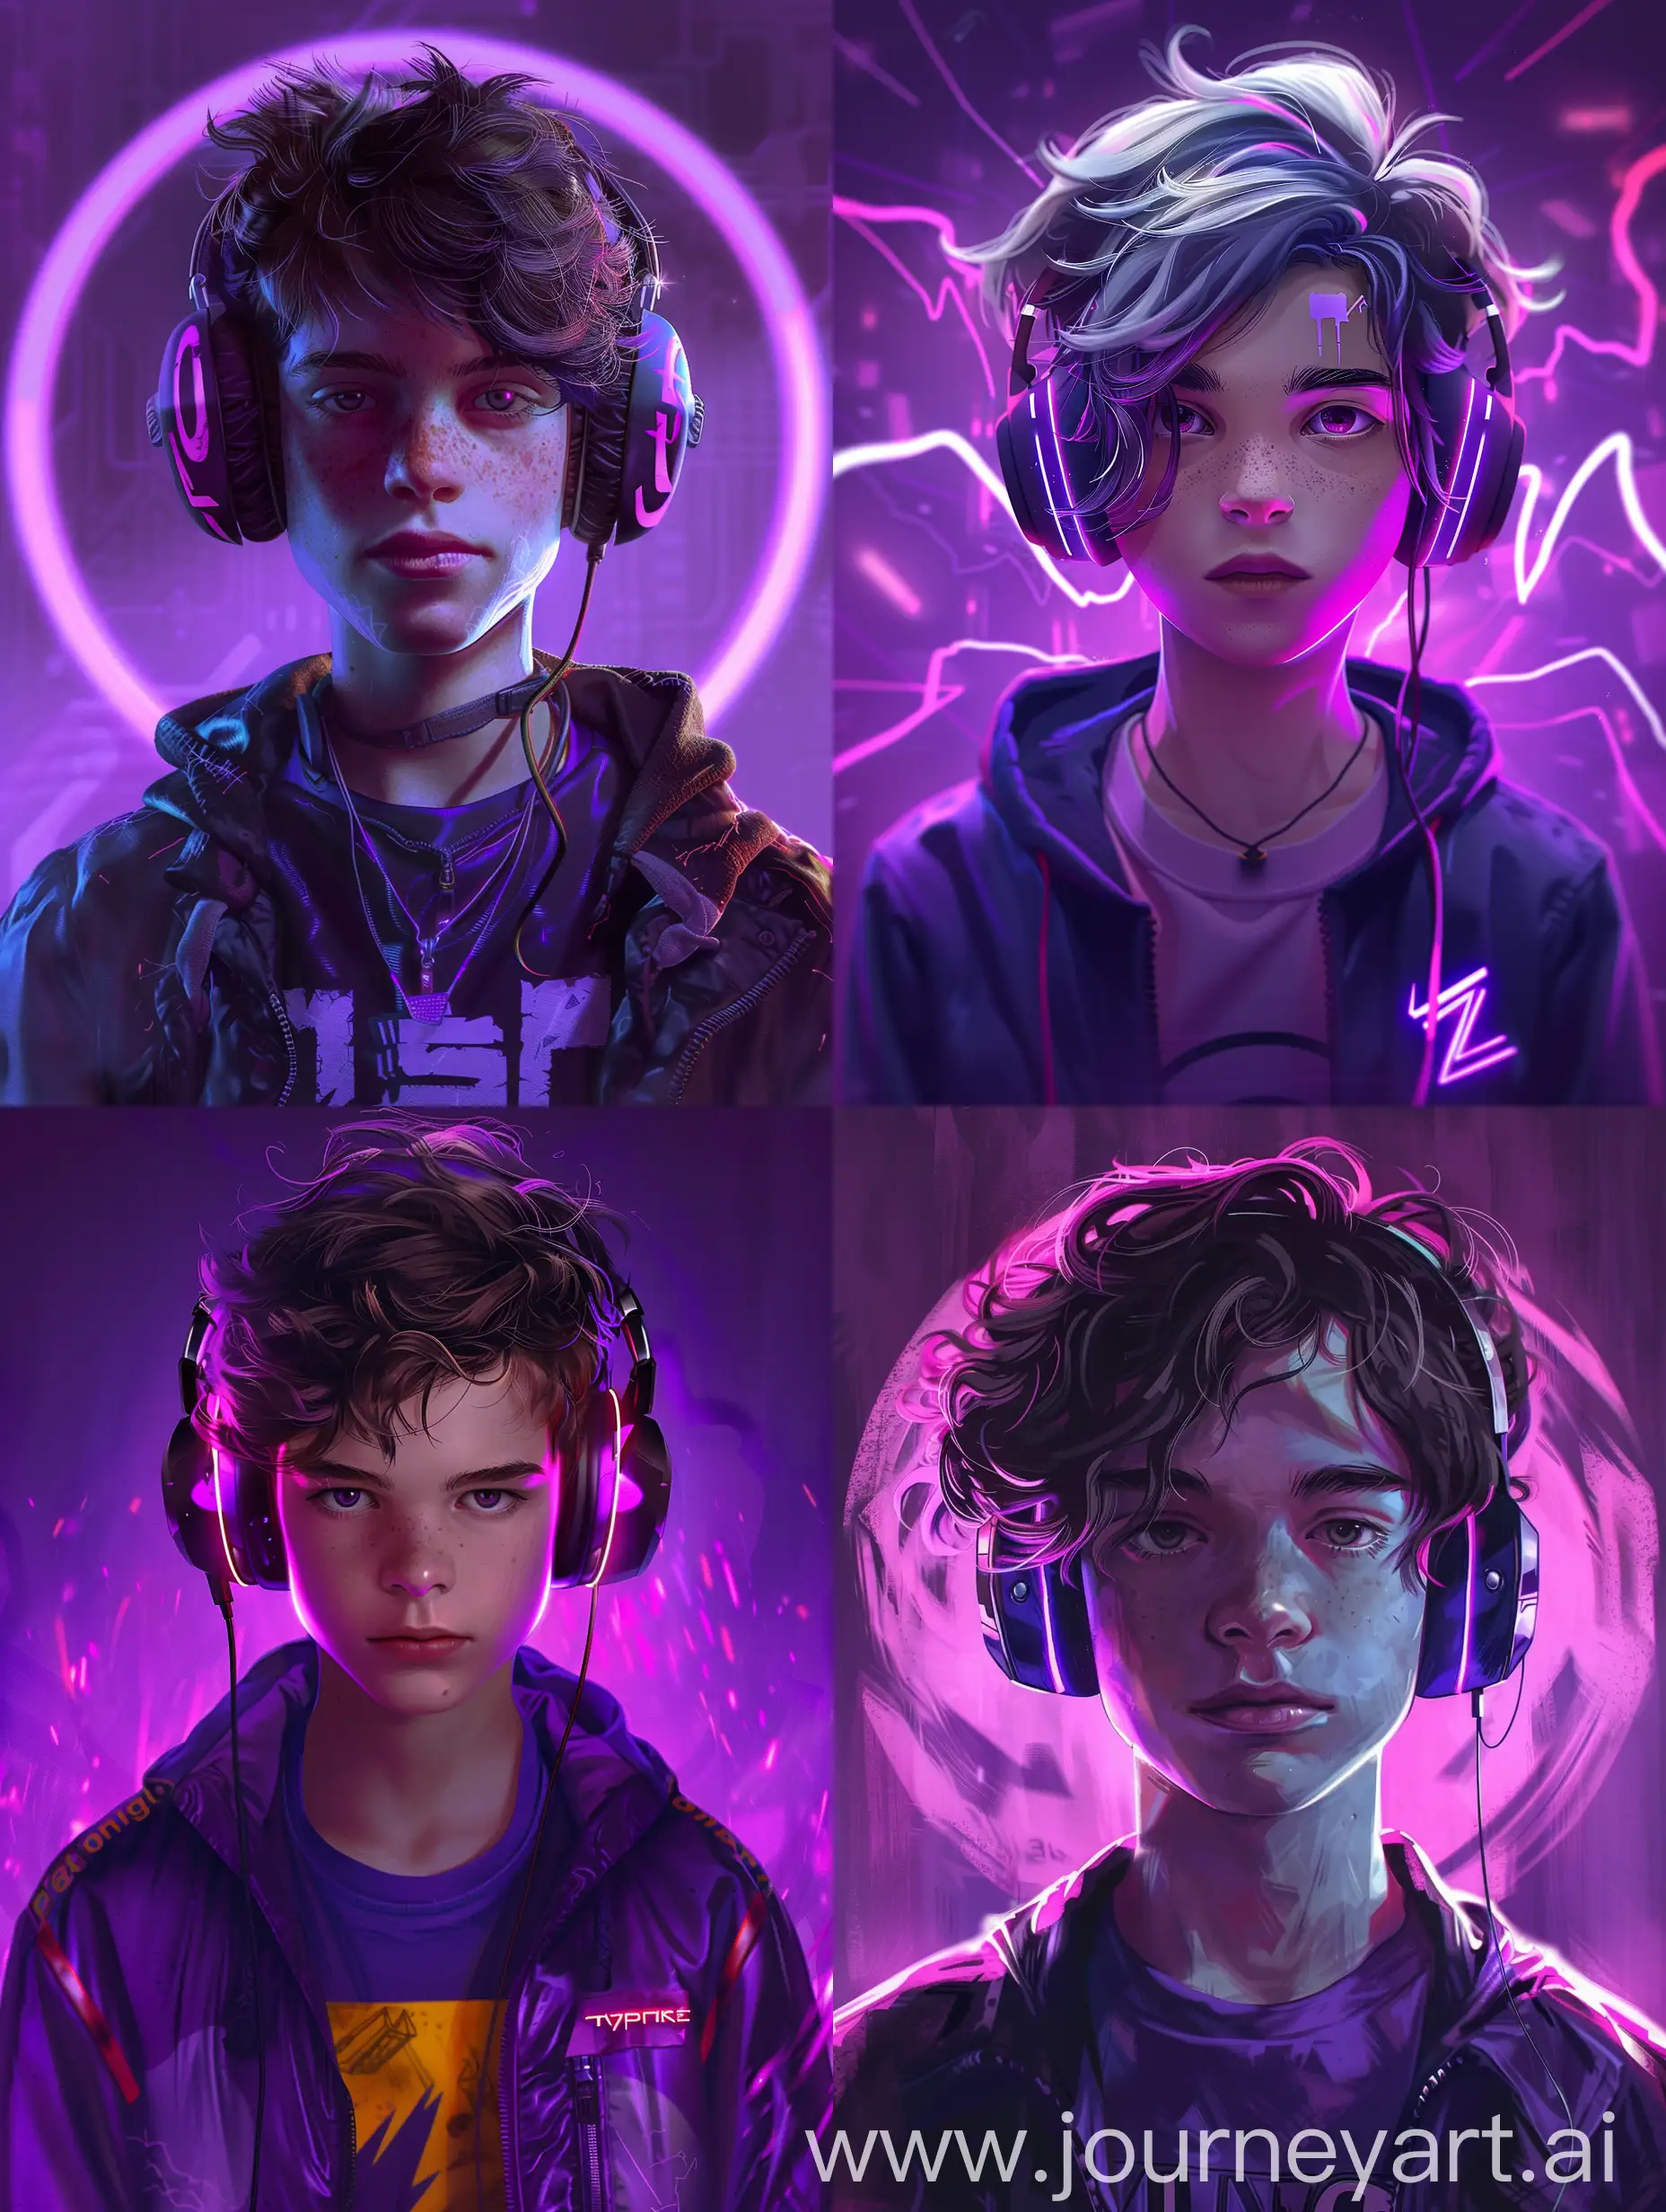 Teenage-Brothers-in-a-Futuristic-Cyberpunk-Universe-with-Headphones